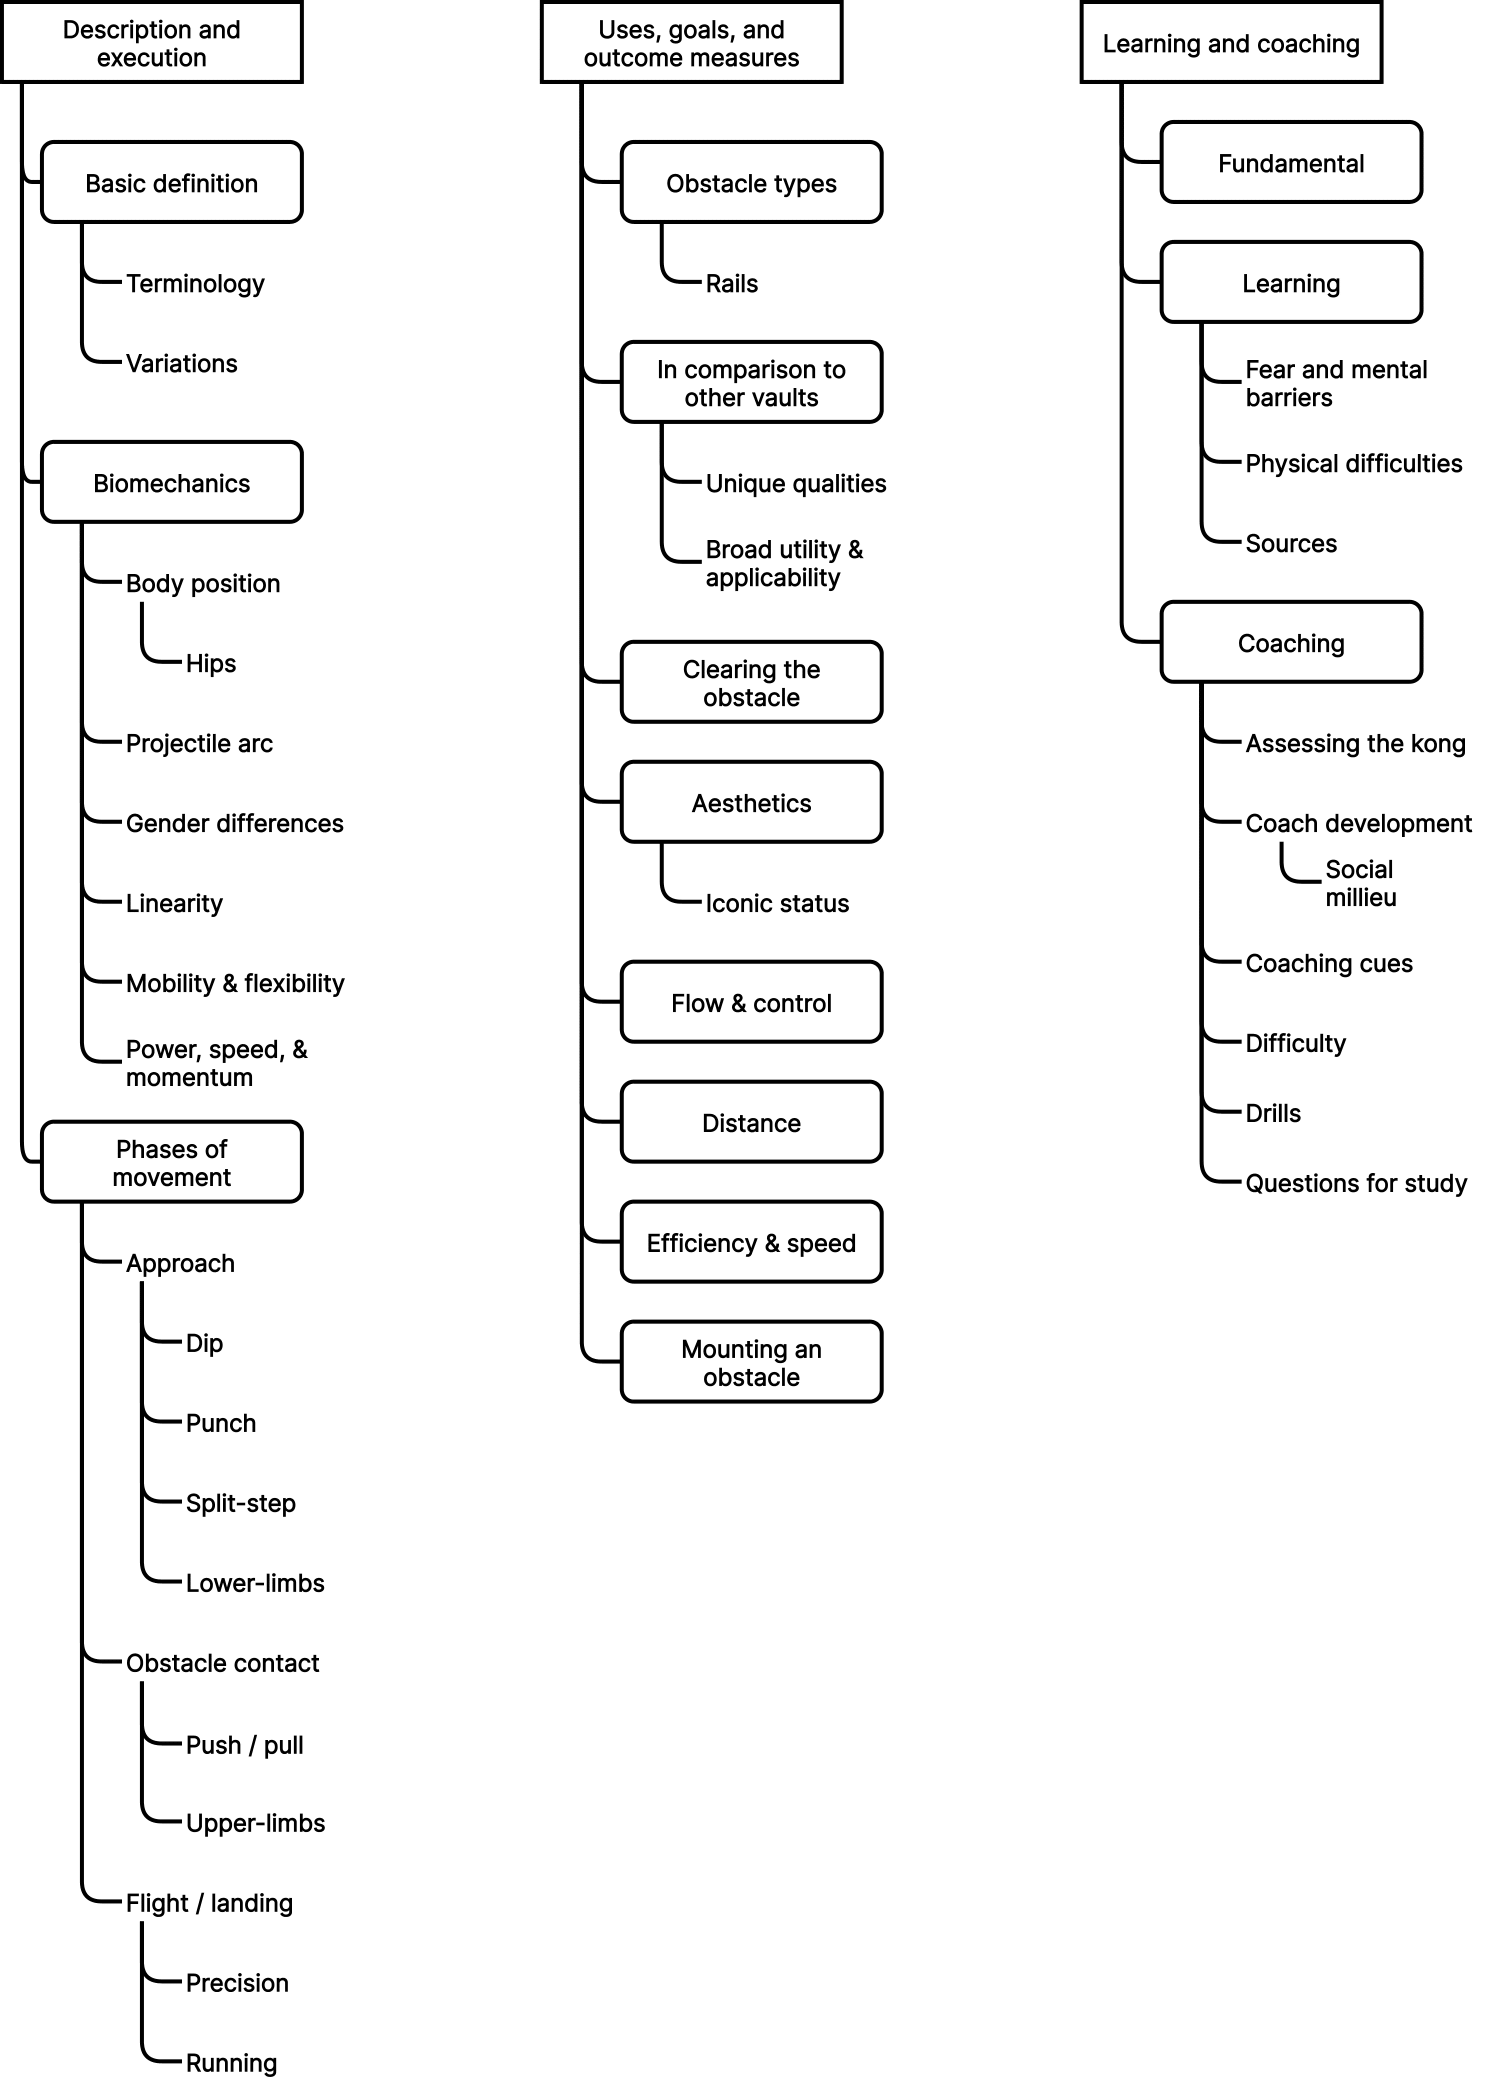 Flowchart depicting the breakdown of themes and sub-themes identified in analysis of the interview transcripts. 3 main themes were identified - ‘description and execution’, ‘uses, goals, and outcome measures’, and ‘learning and coaching’. Description and execution further broke down into the sub-themes of basic defining features, vault biomechanics, and the phases of the movement such as take-off, obstacle contact, and flight. Uses and goals identified numerous sub-themes, notably the type of obstacle the vault can be used on, how it differs from other parkour vaults, and why an athlete may choose it, such as utility or aesthetics. Finally learning and coaching identified sub-themes for how participants learnt the vault themselves, the difficulties and physical or mental barriers they encountered, how they now pass it onto their students including common drills and their development as a coach, and finally considered if the kong vault is a fundamental parkour movement.